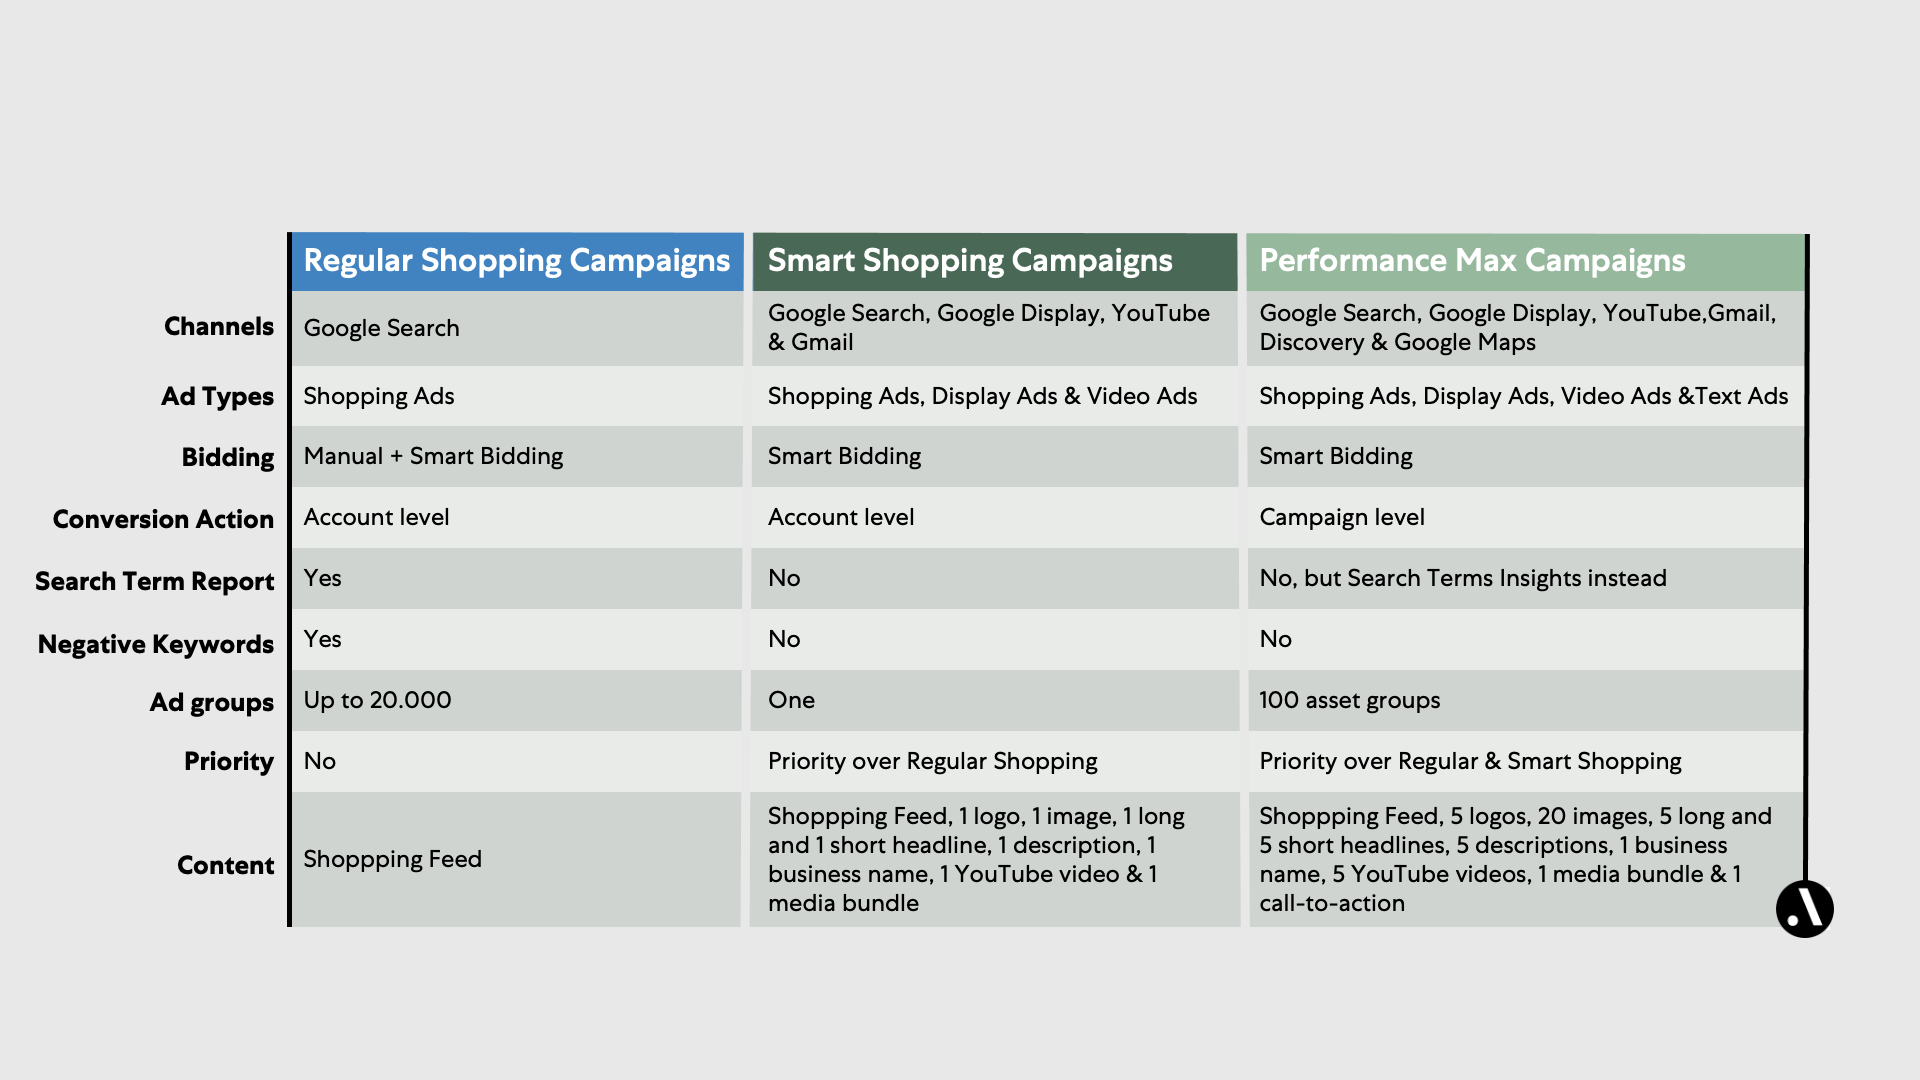 Performance Maxcampaigns vs Smart Shopping campaigns